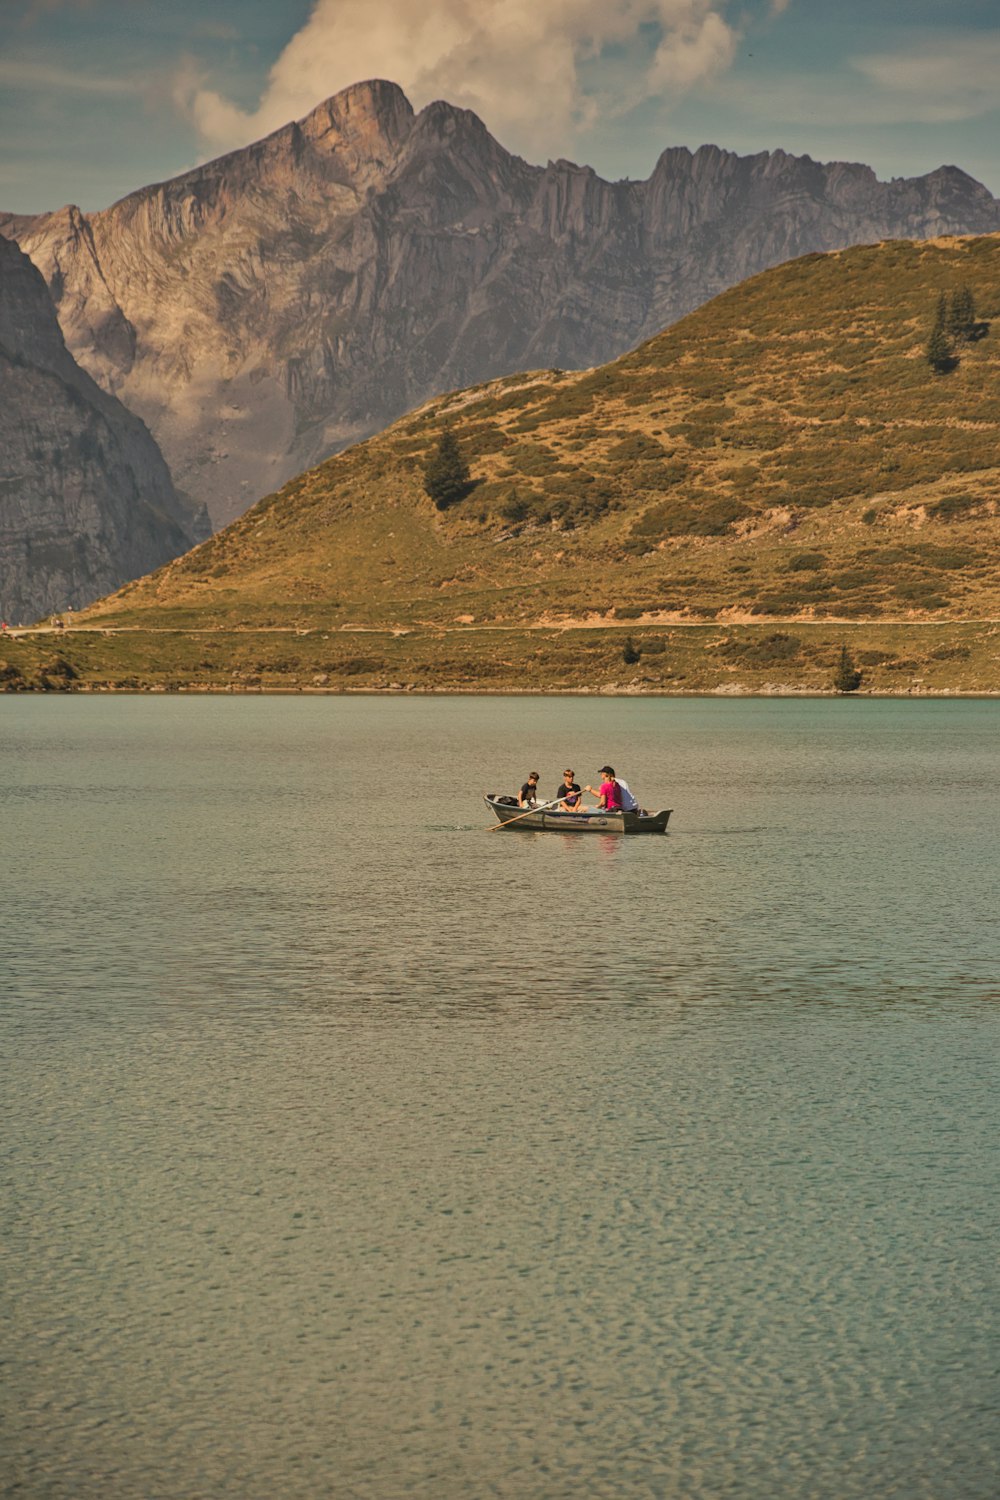 a group of people in a small boat on a lake